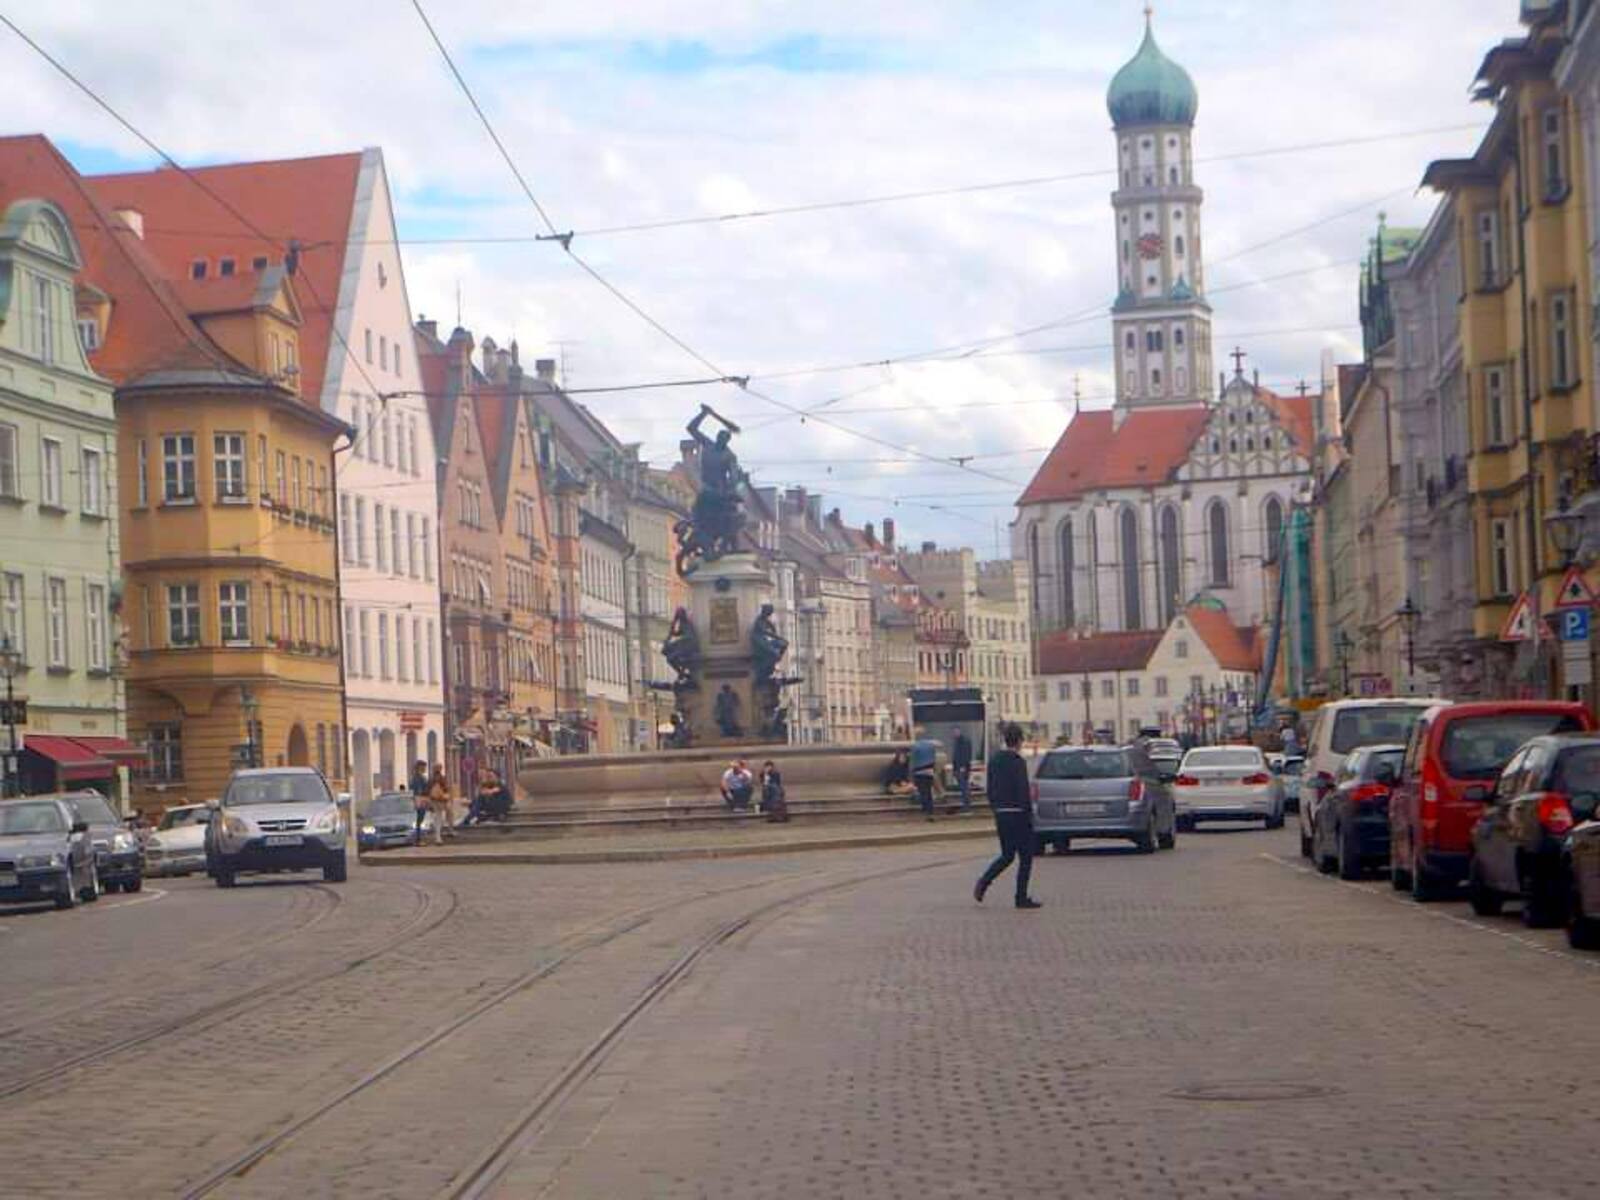 Streets of Augsburg, Germany